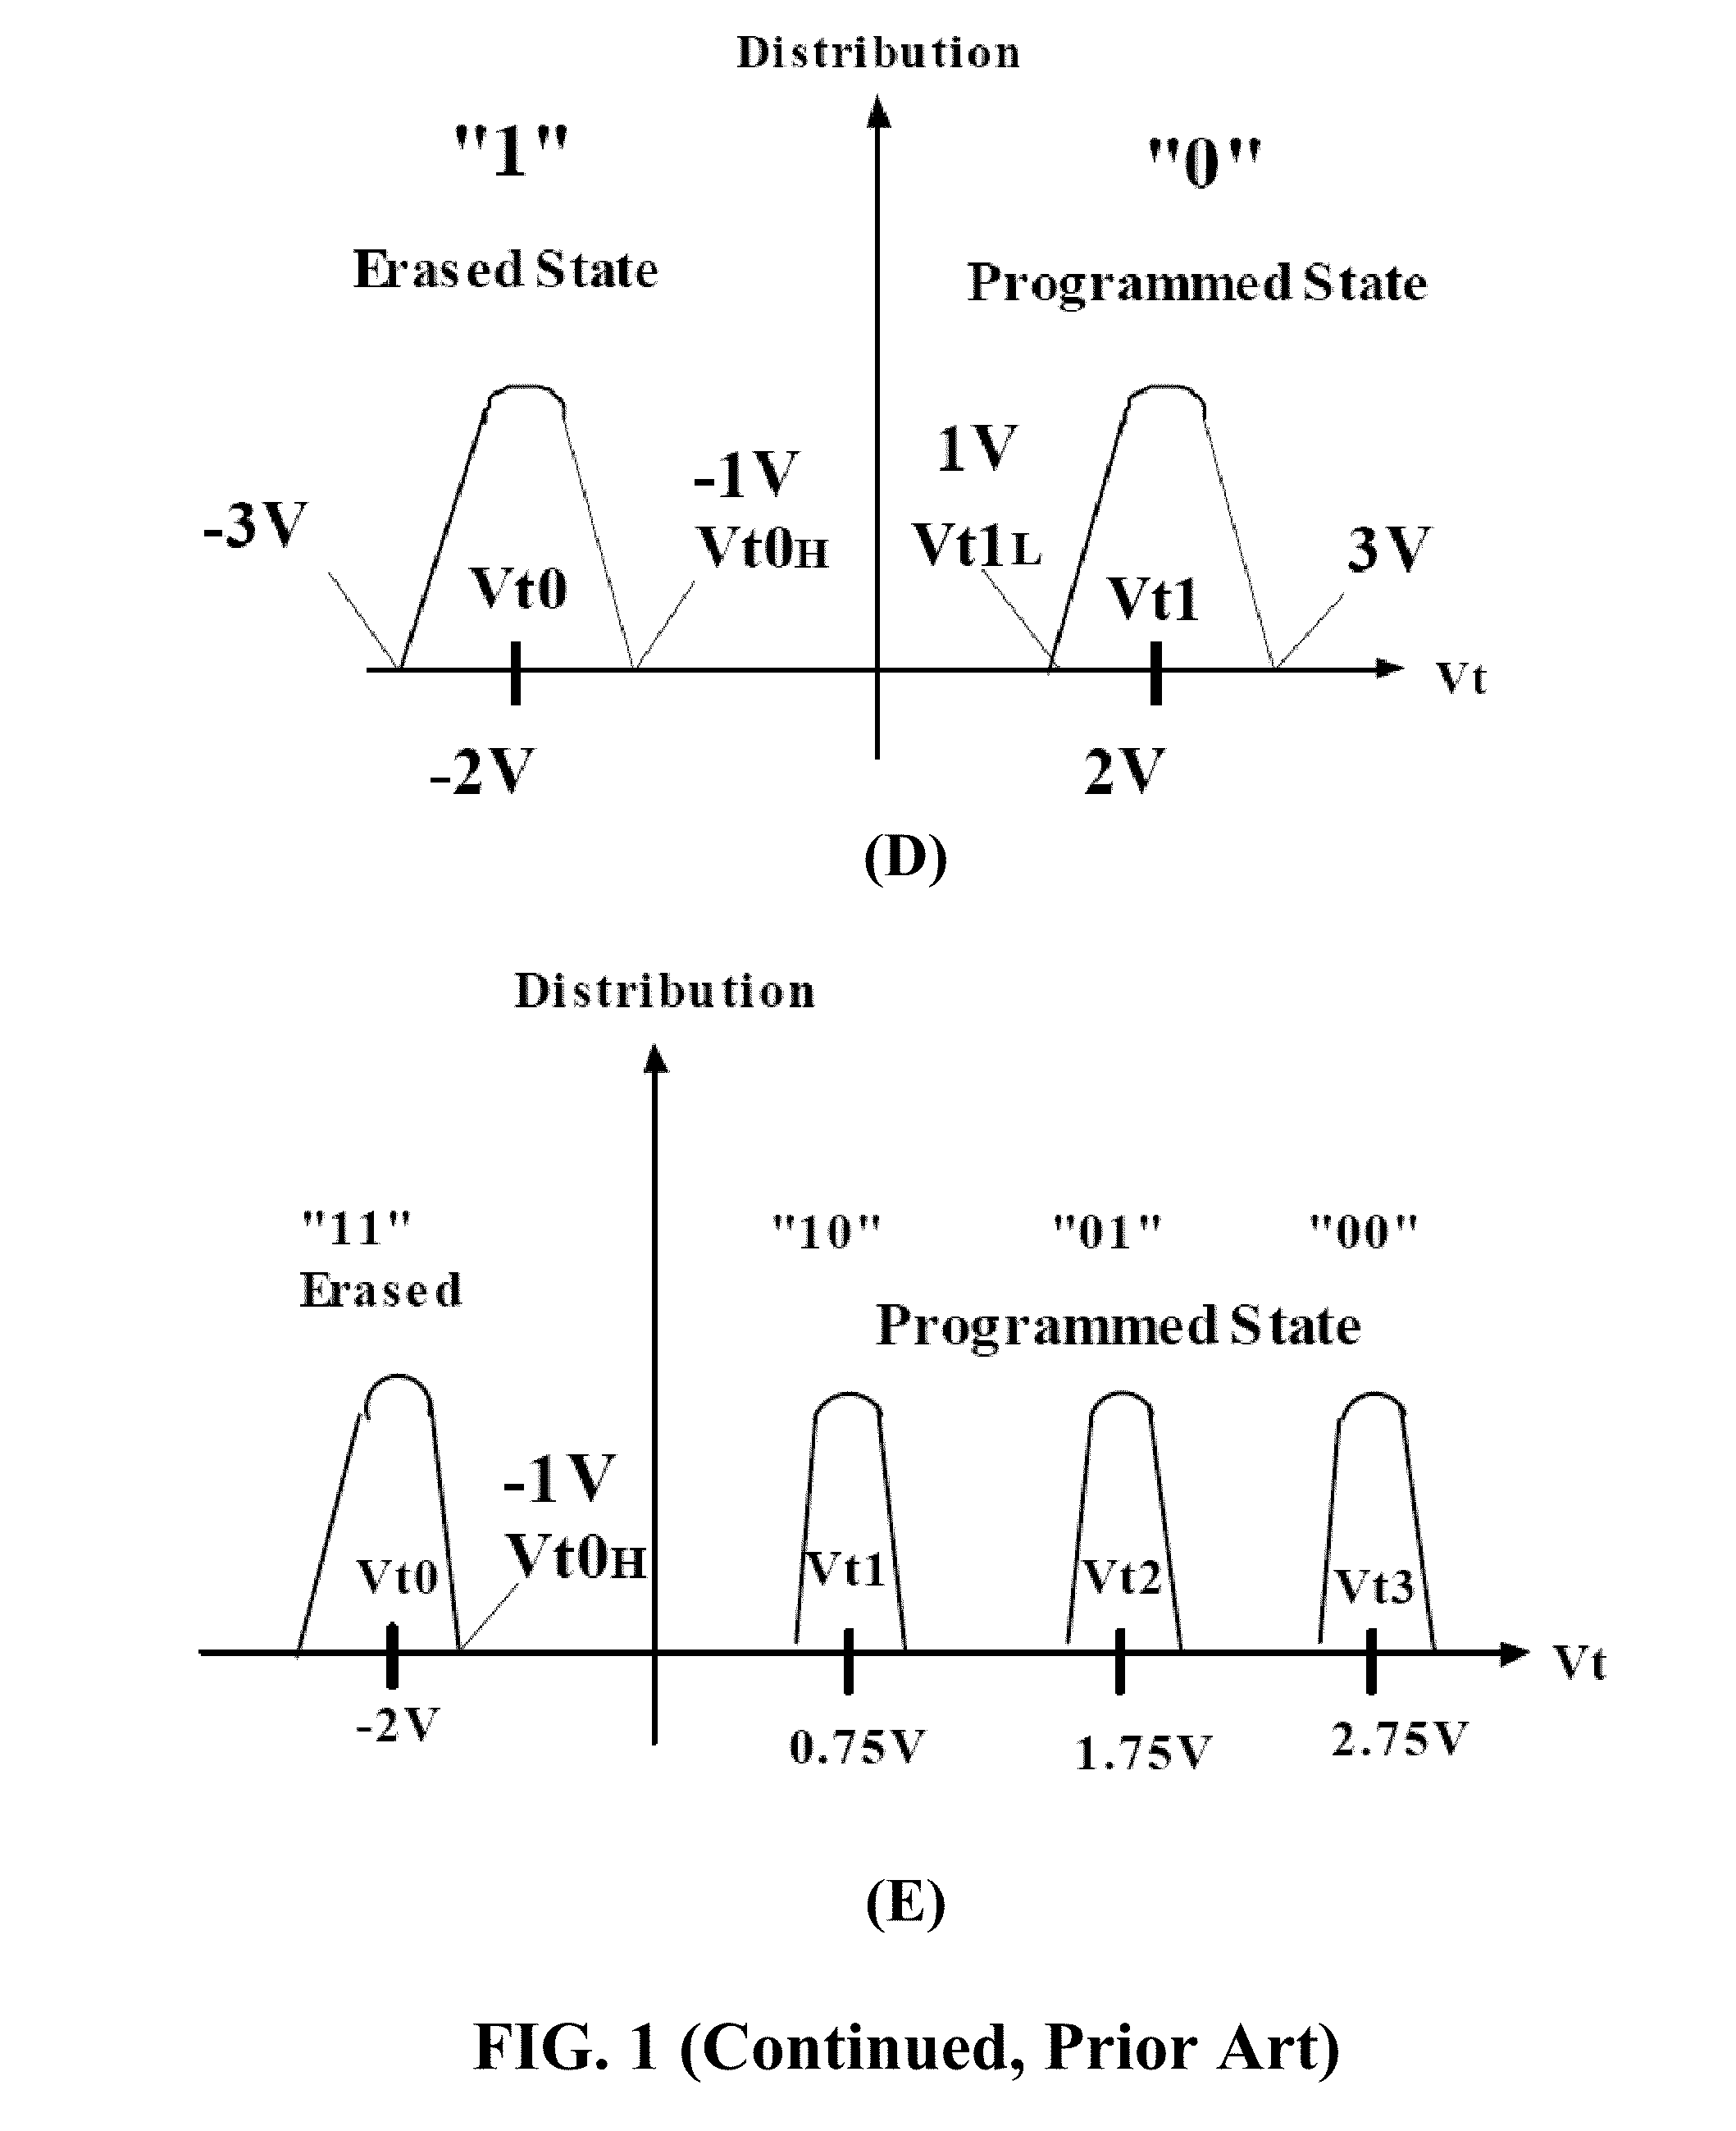 Memory system having NAND-based nor and NAND flashes and SRAM integrated in one chip for hybrid data, code and cache storage